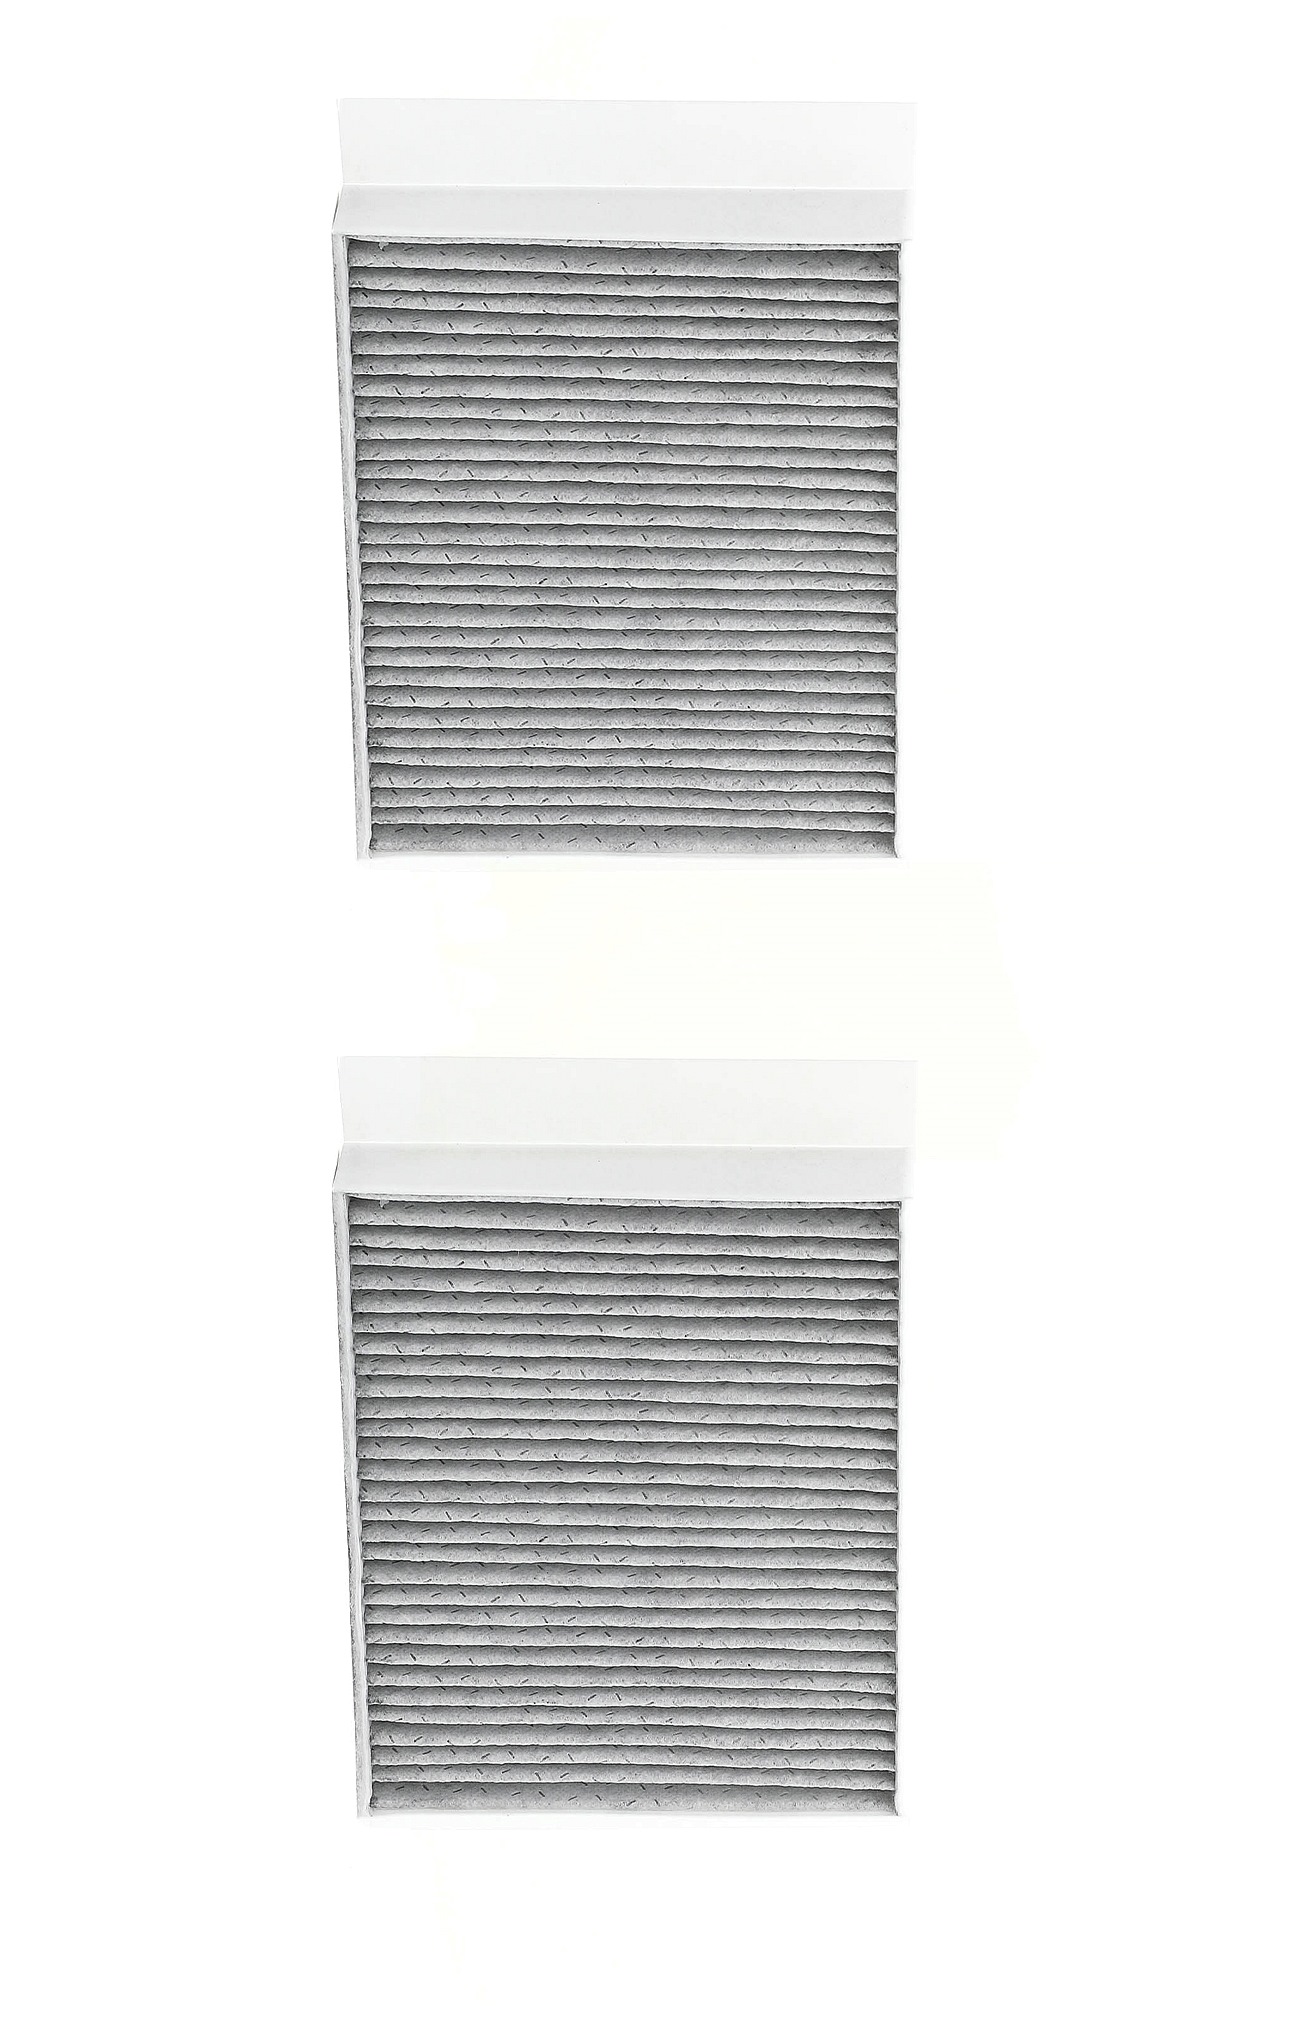 Aircon filter RIDEX PLUS Activated Carbon Filter, with anti-allergic effect, with antibacterial action, 151 mm x 157 mm x 31 mm - 424I0503P